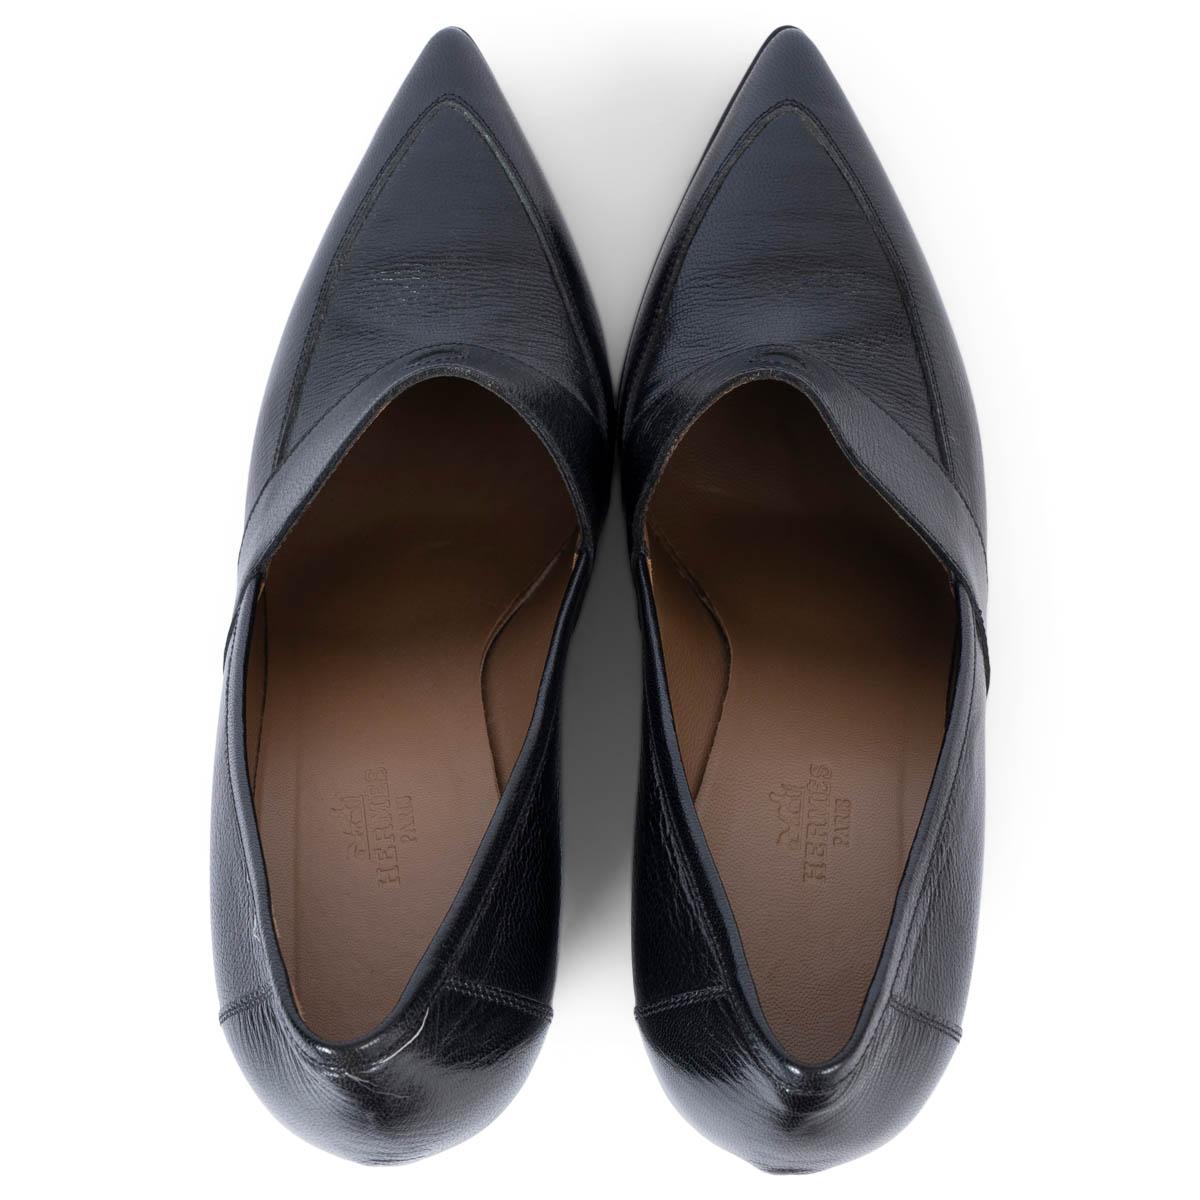 HERMES black leather POINTED TOE WEDGE Pumps Shoes 39 For Sale 1